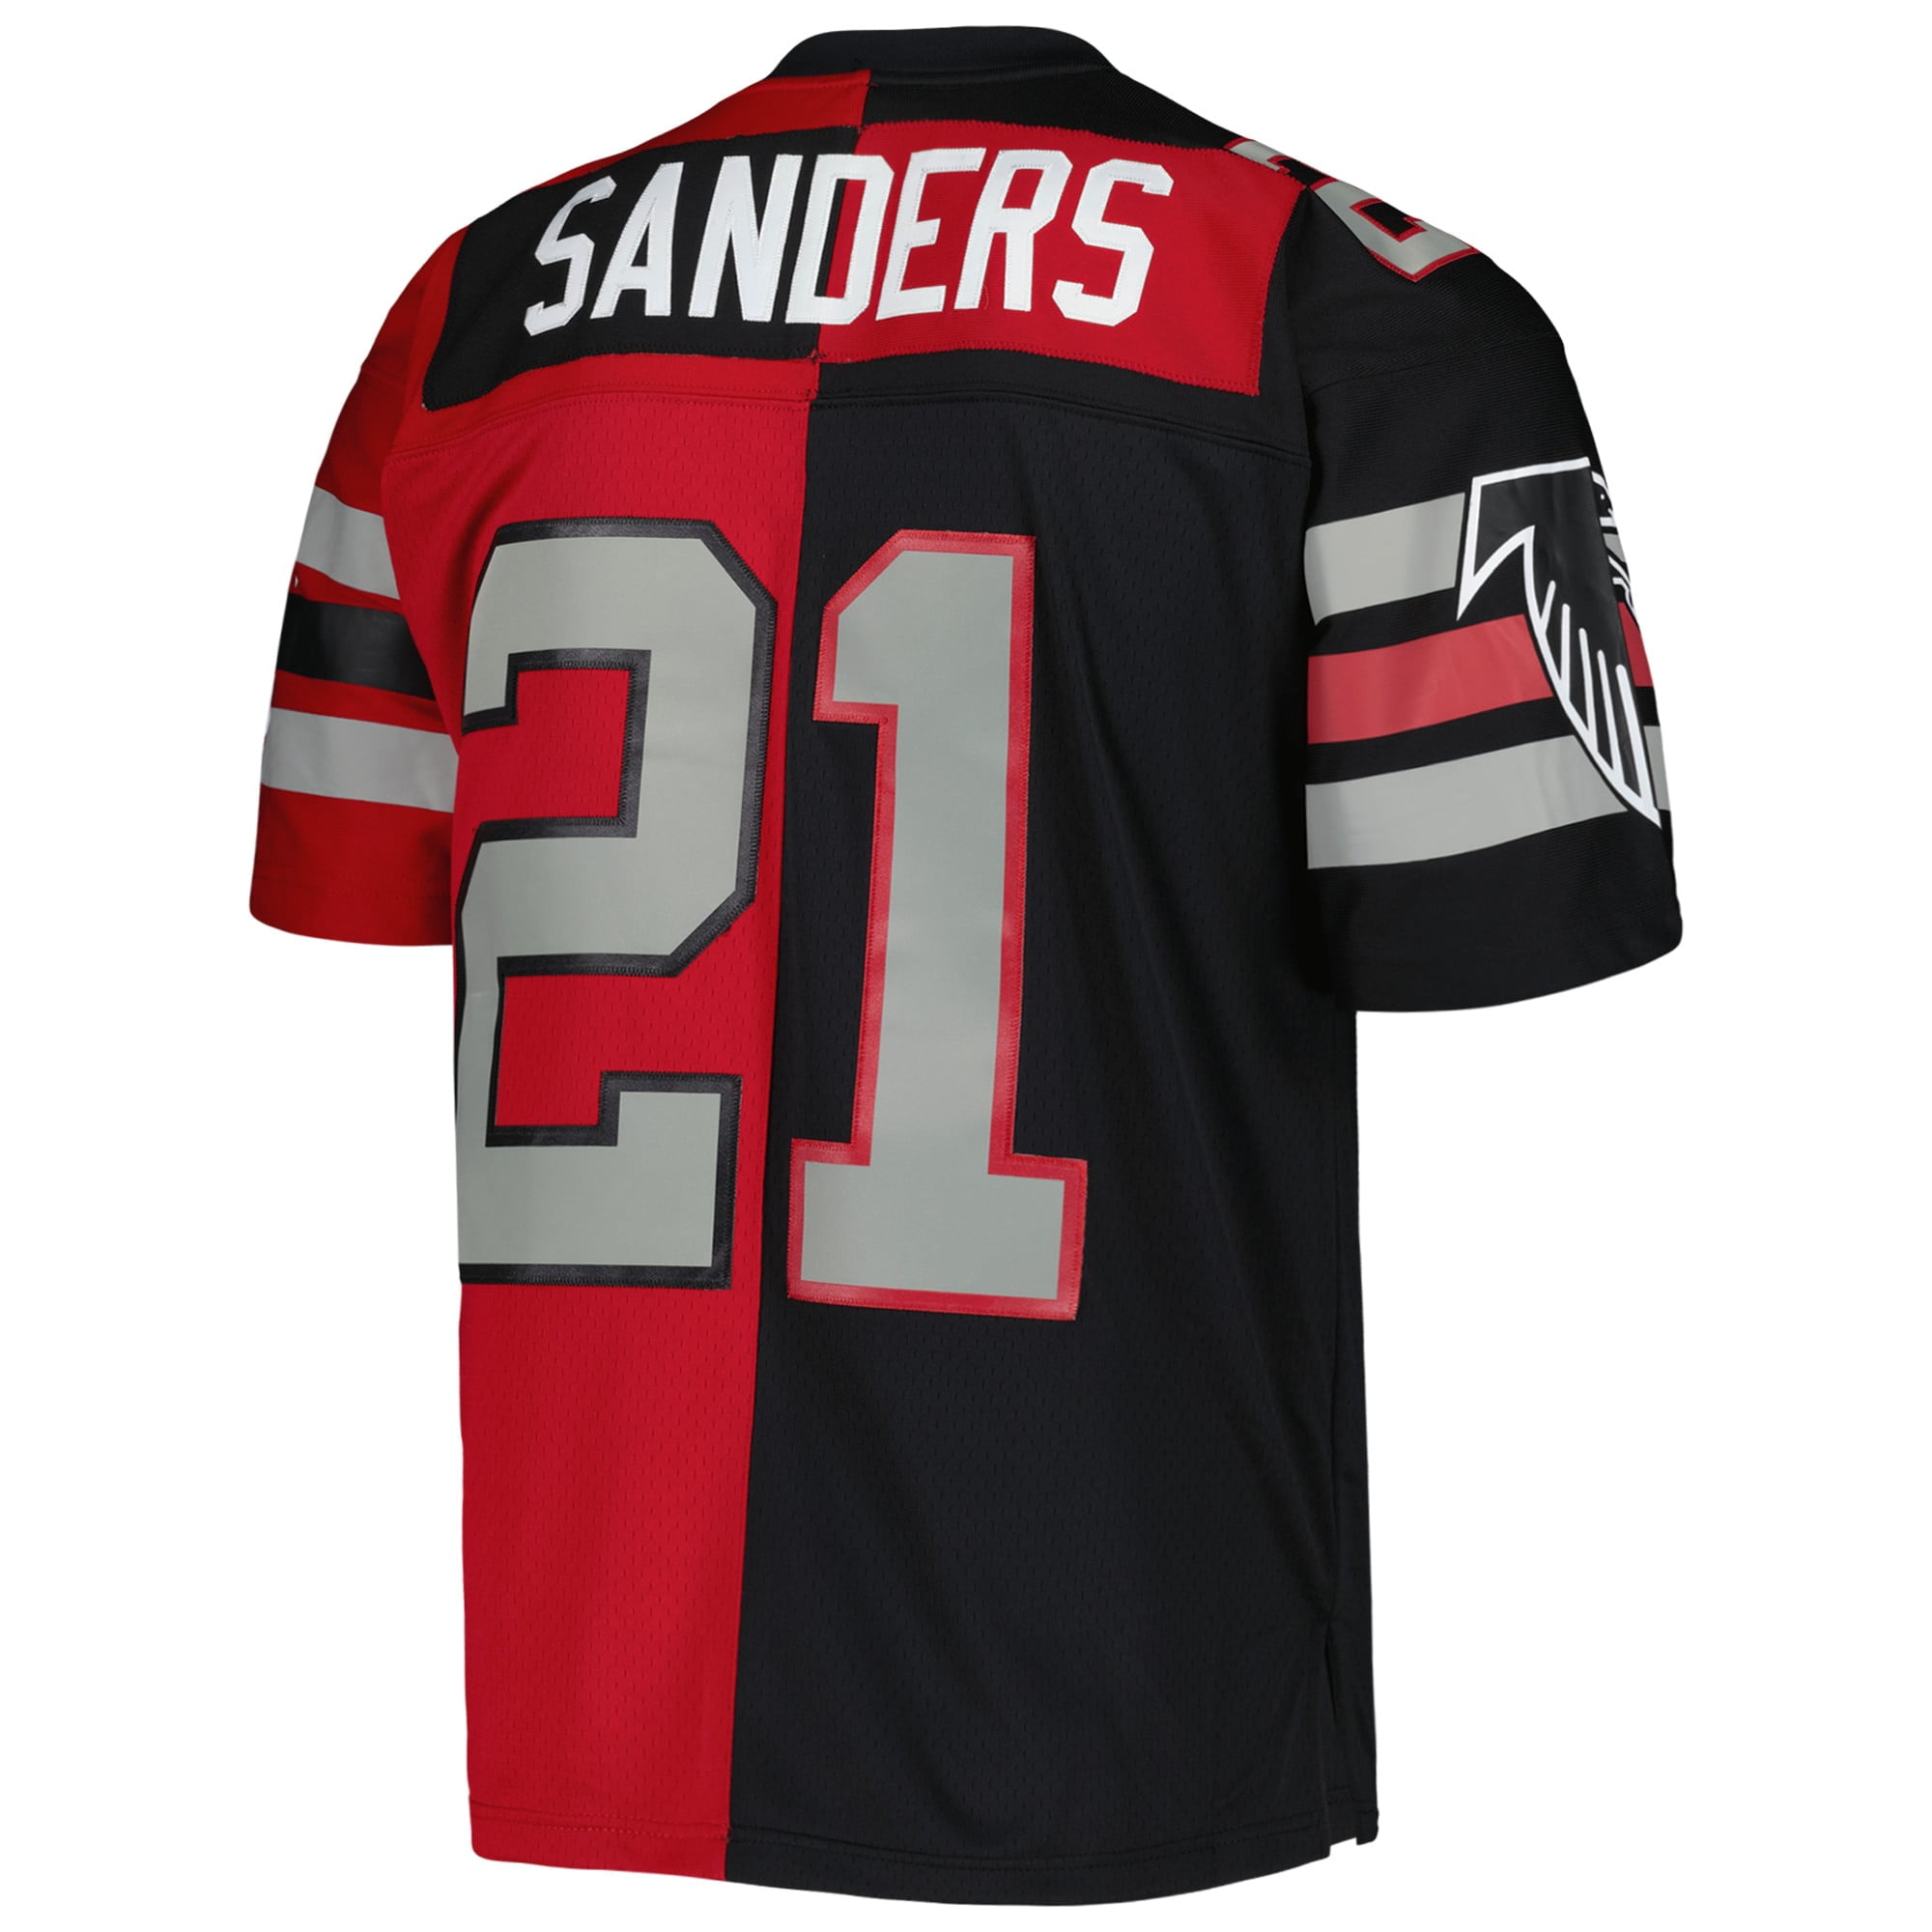 Deion Sanders Atlanta Falcons Autographed Mitchell & Ness Red